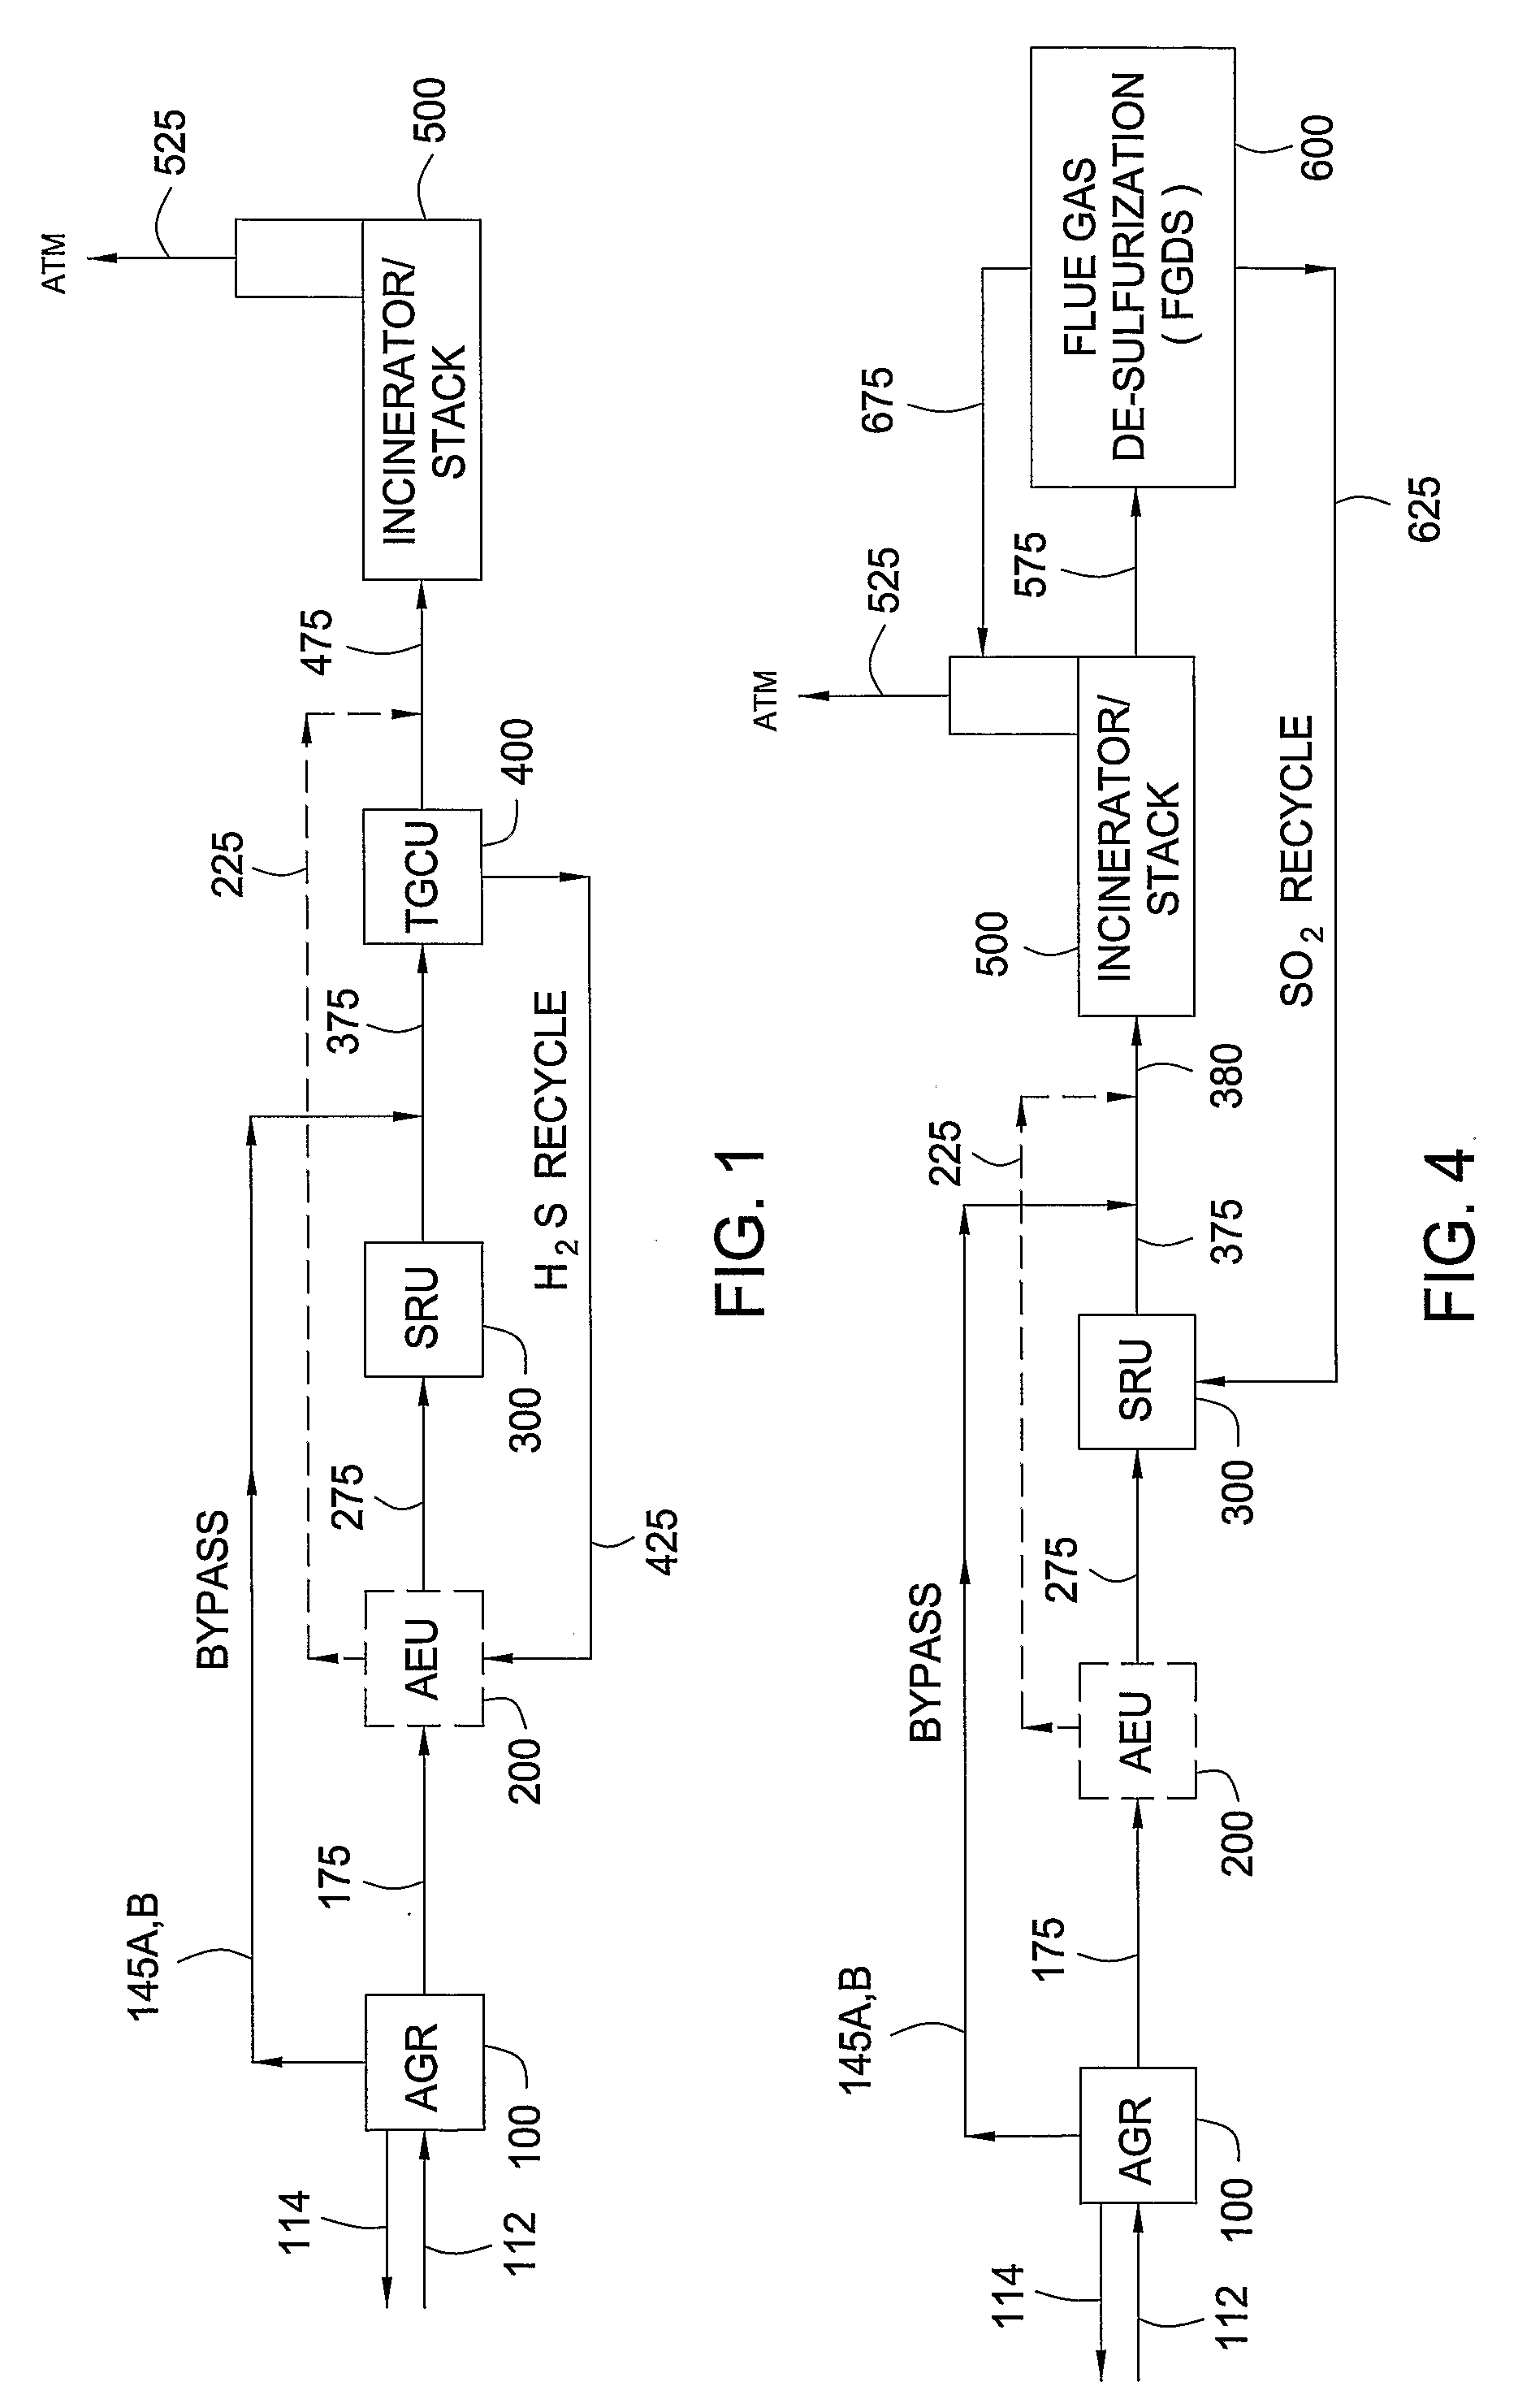 Methods for Removing Sulfur-Containing Compounds